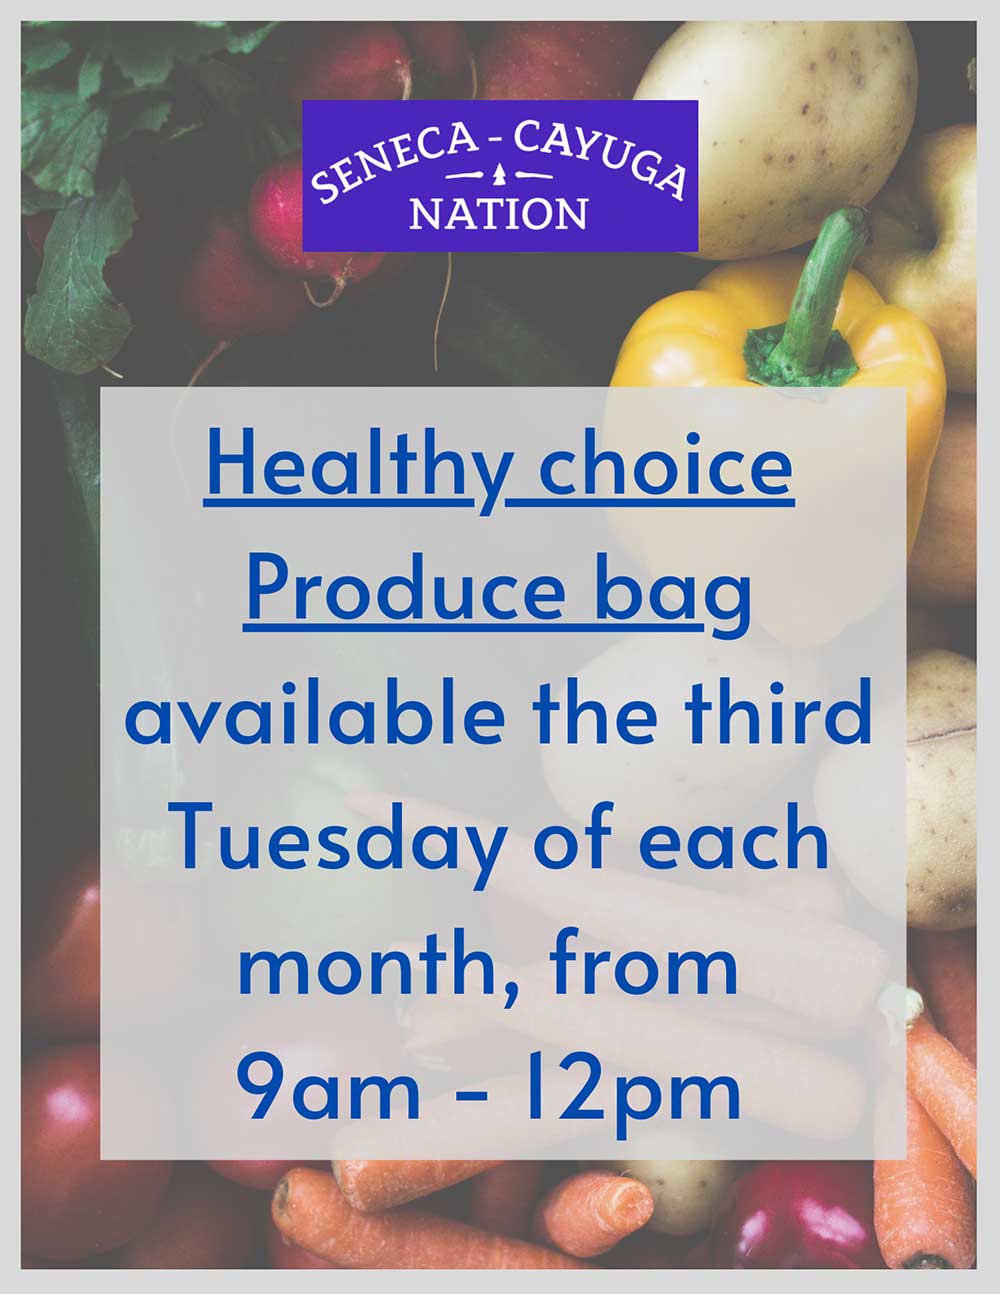 Healthy Choice Produce Bag available the third Tuesday of each month, from 9am - 12pm